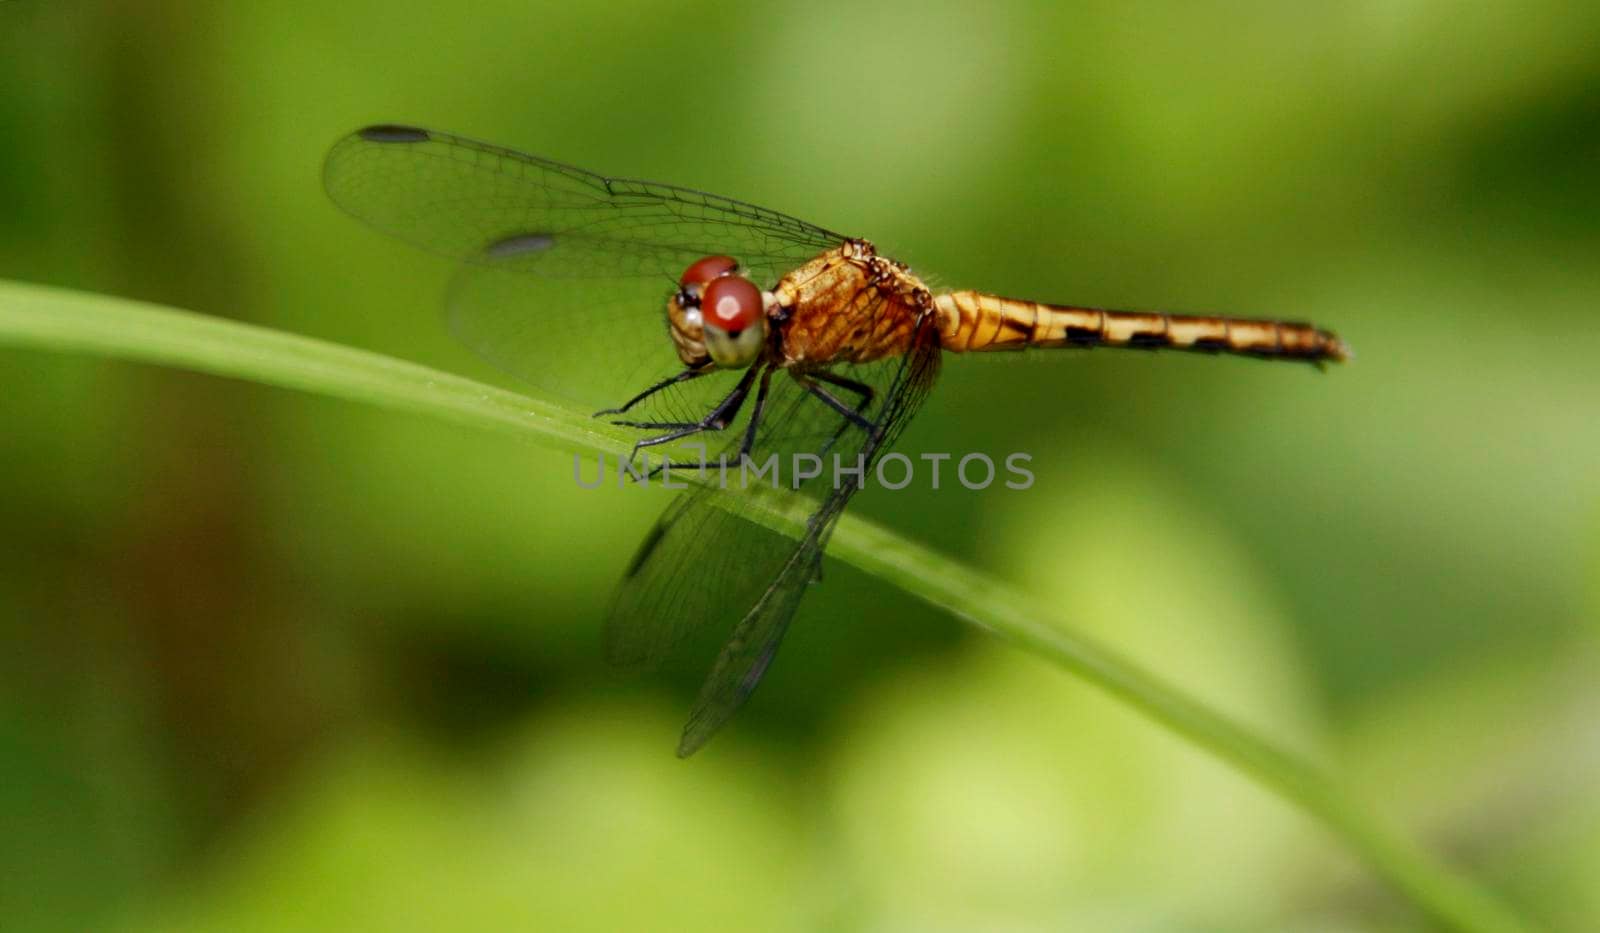 conde, bahia / brazil - july 26, 2014: Dragonfly is view garden inn in the city of Conde.